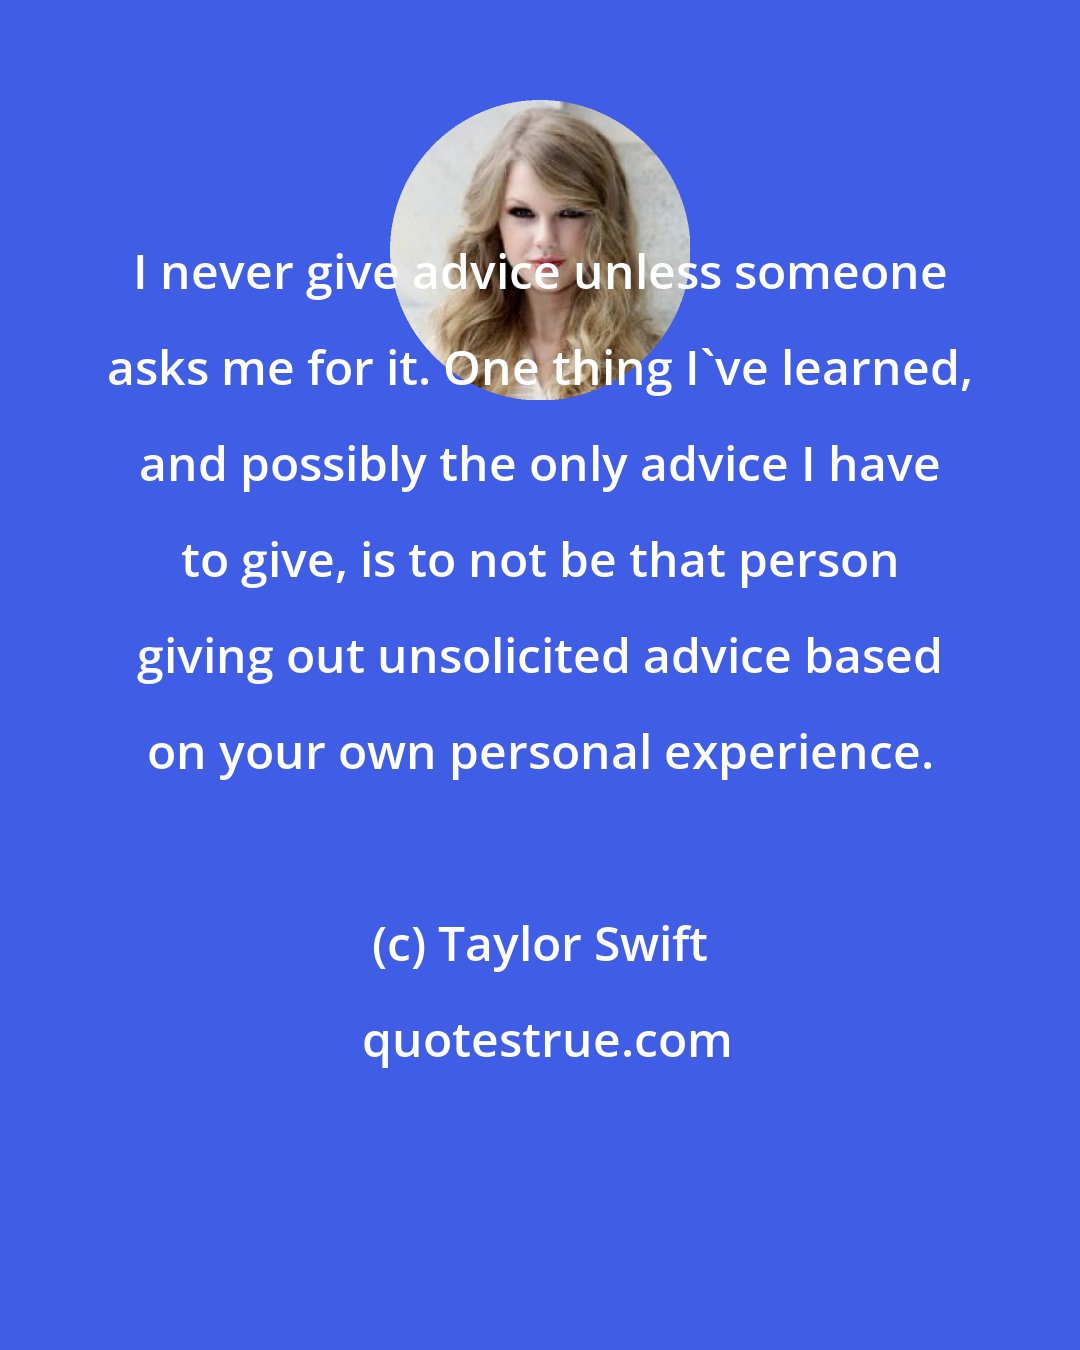 Taylor Swift: I never give advice unless someone asks me for it. One thing I've learned, and possibly the only advice I have to give, is to not be that person giving out unsolicited advice based on your own personal experience.